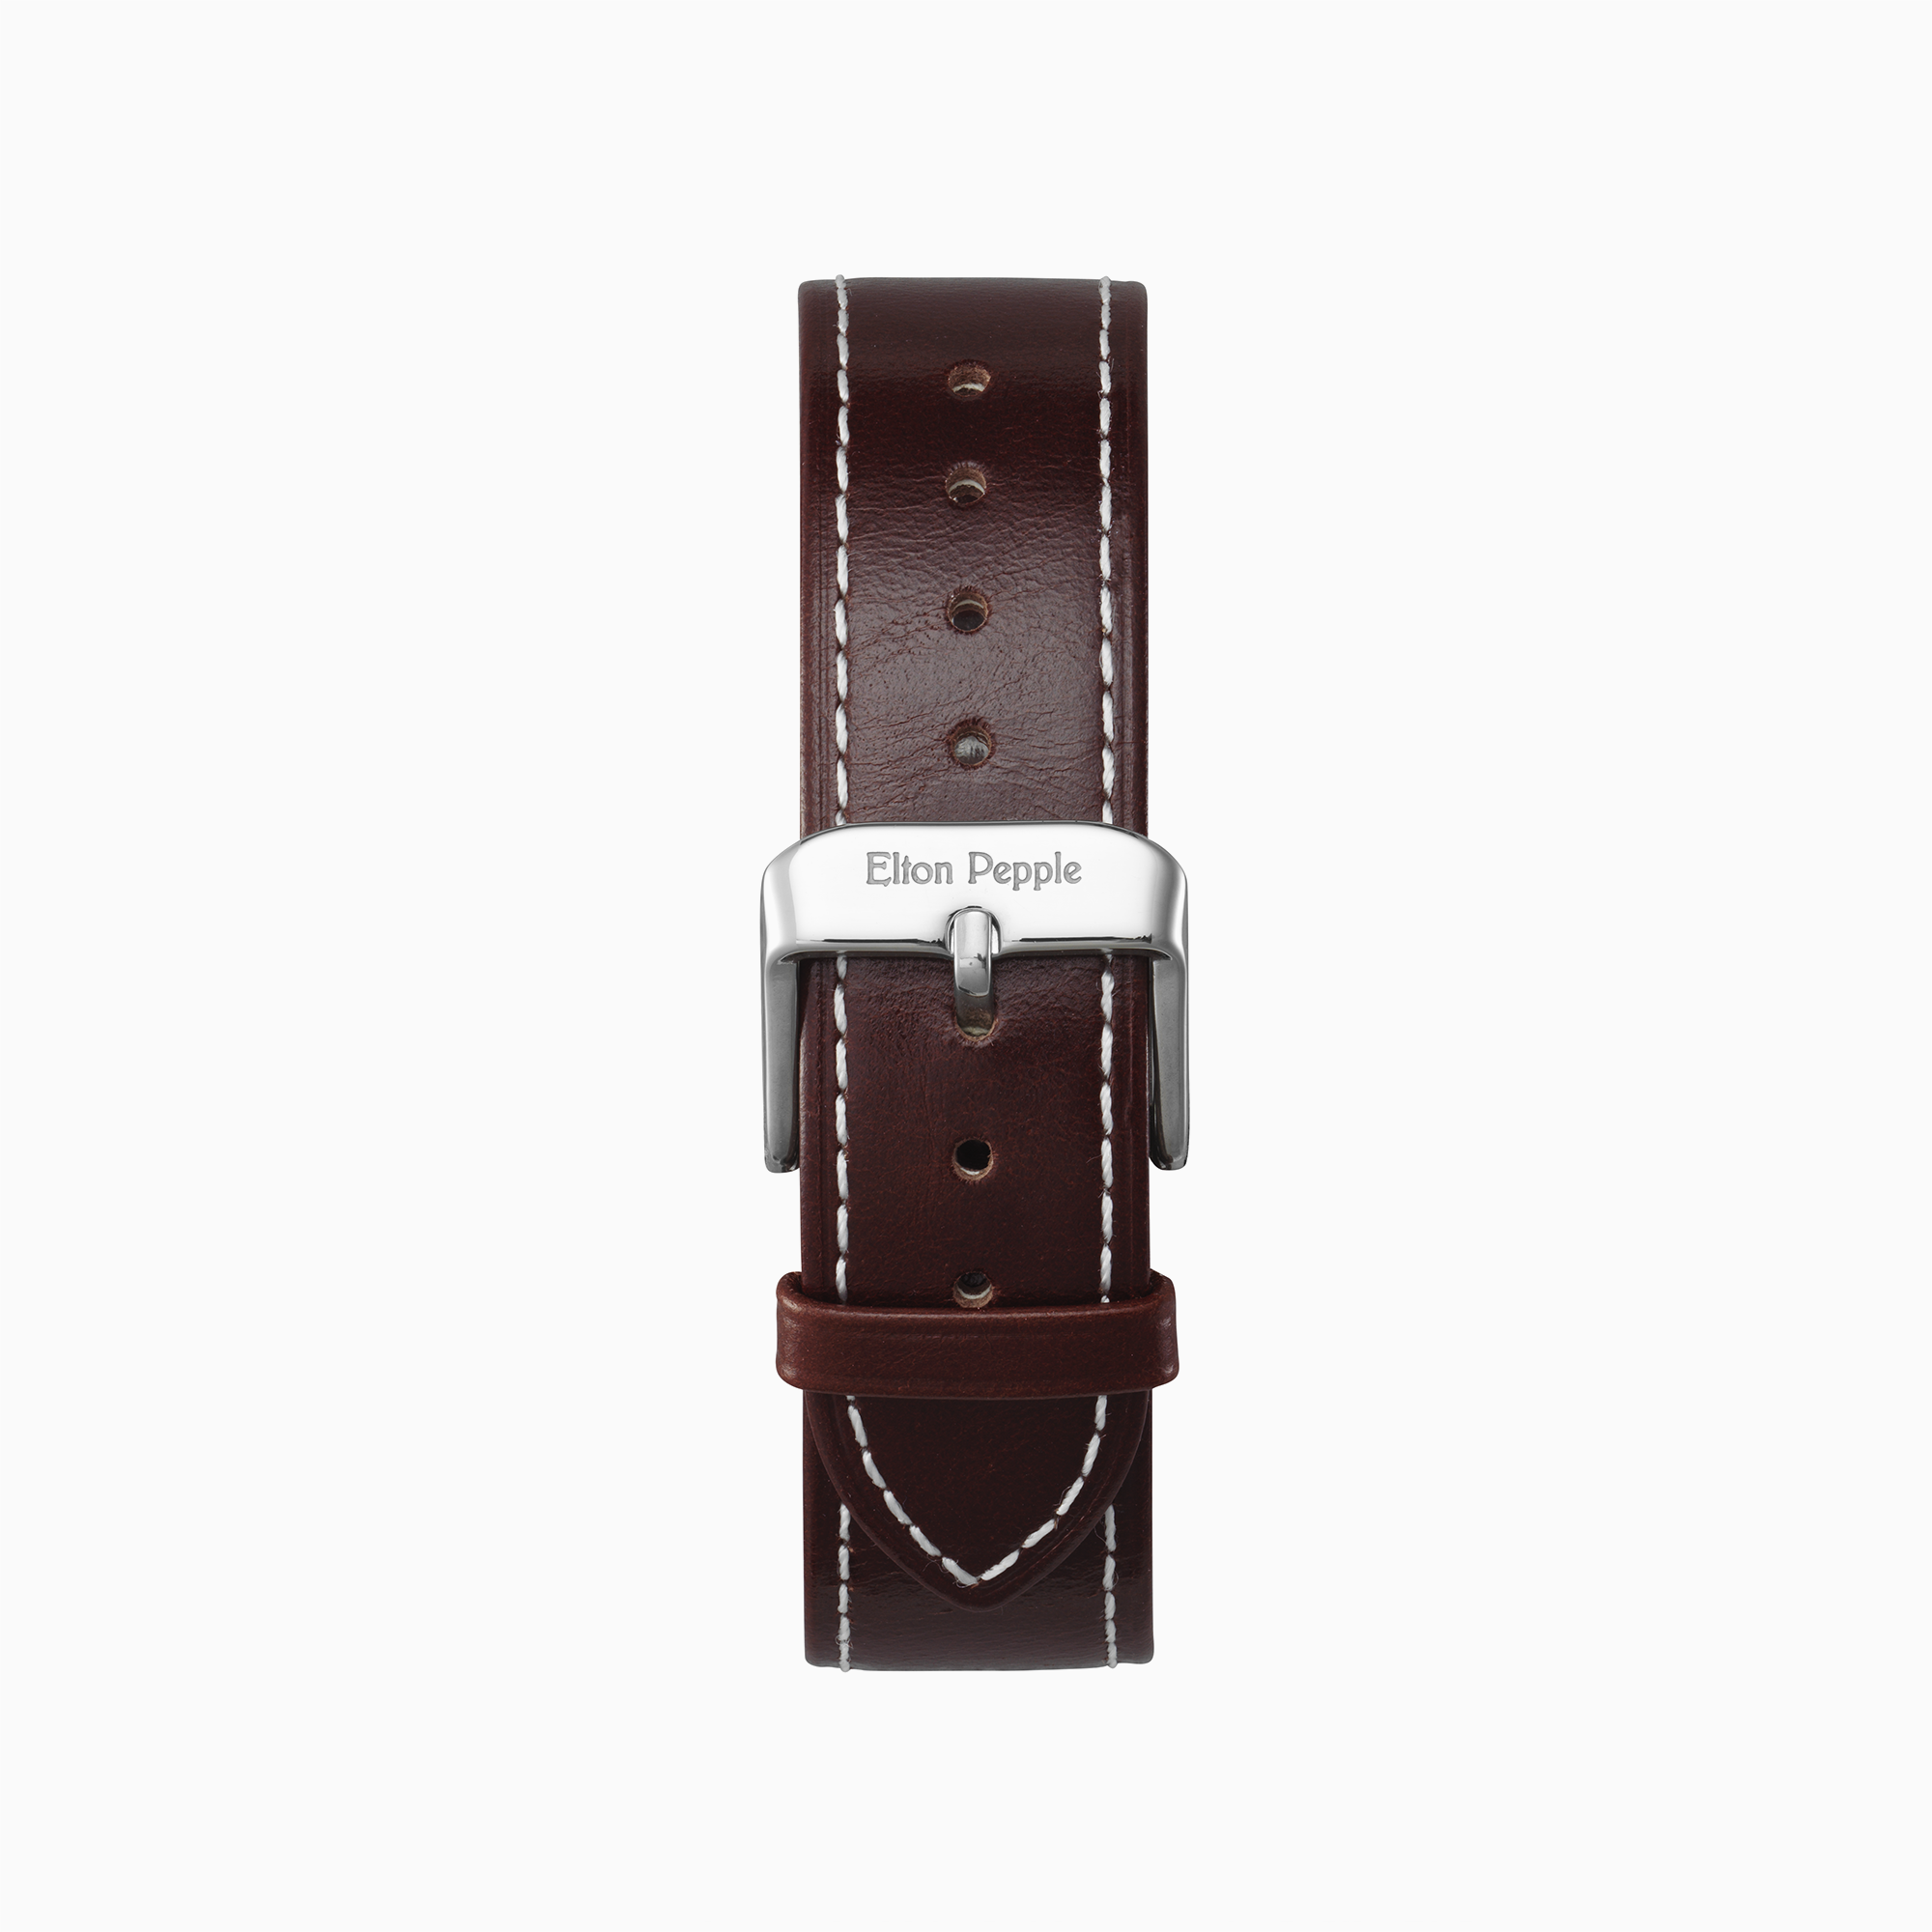 Loop Stitch - Silver leather strap